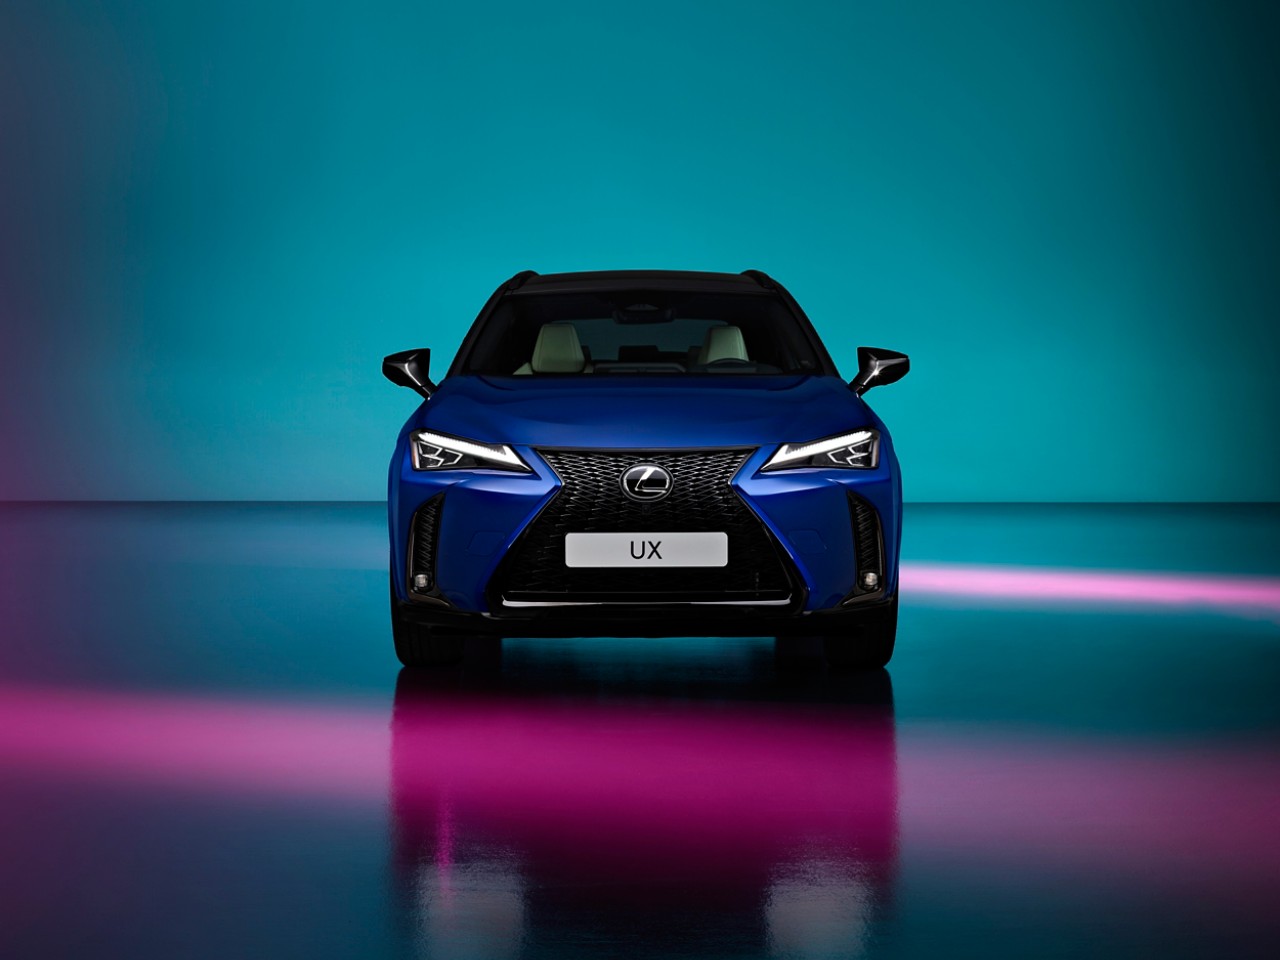 Front view of the Lexus UX